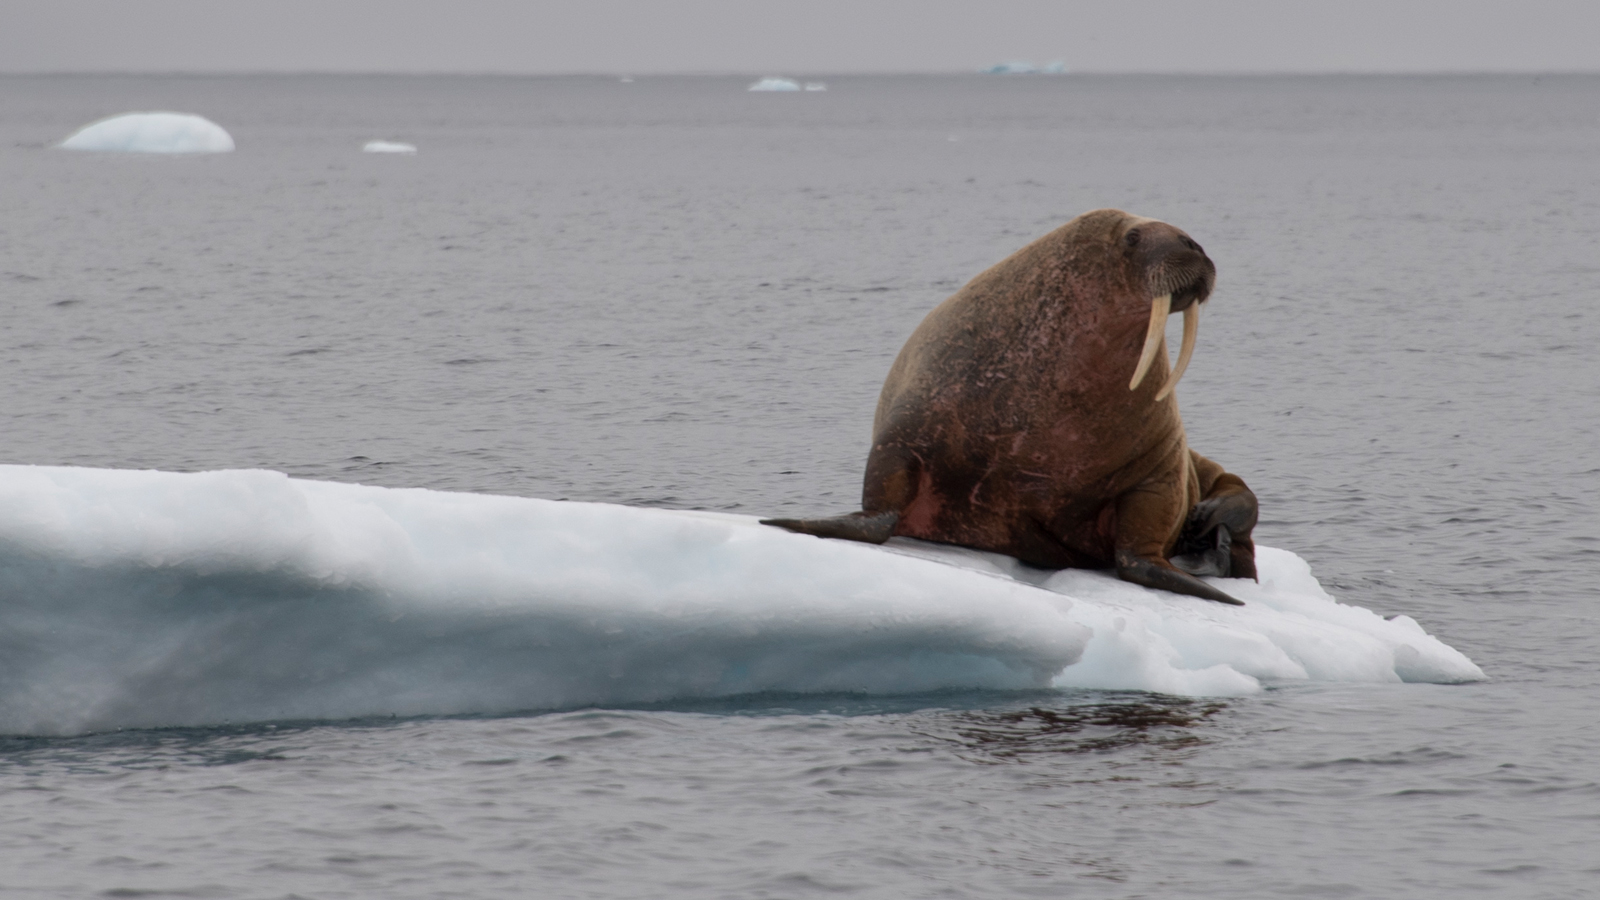 A walrus perches on a large slab of ice.